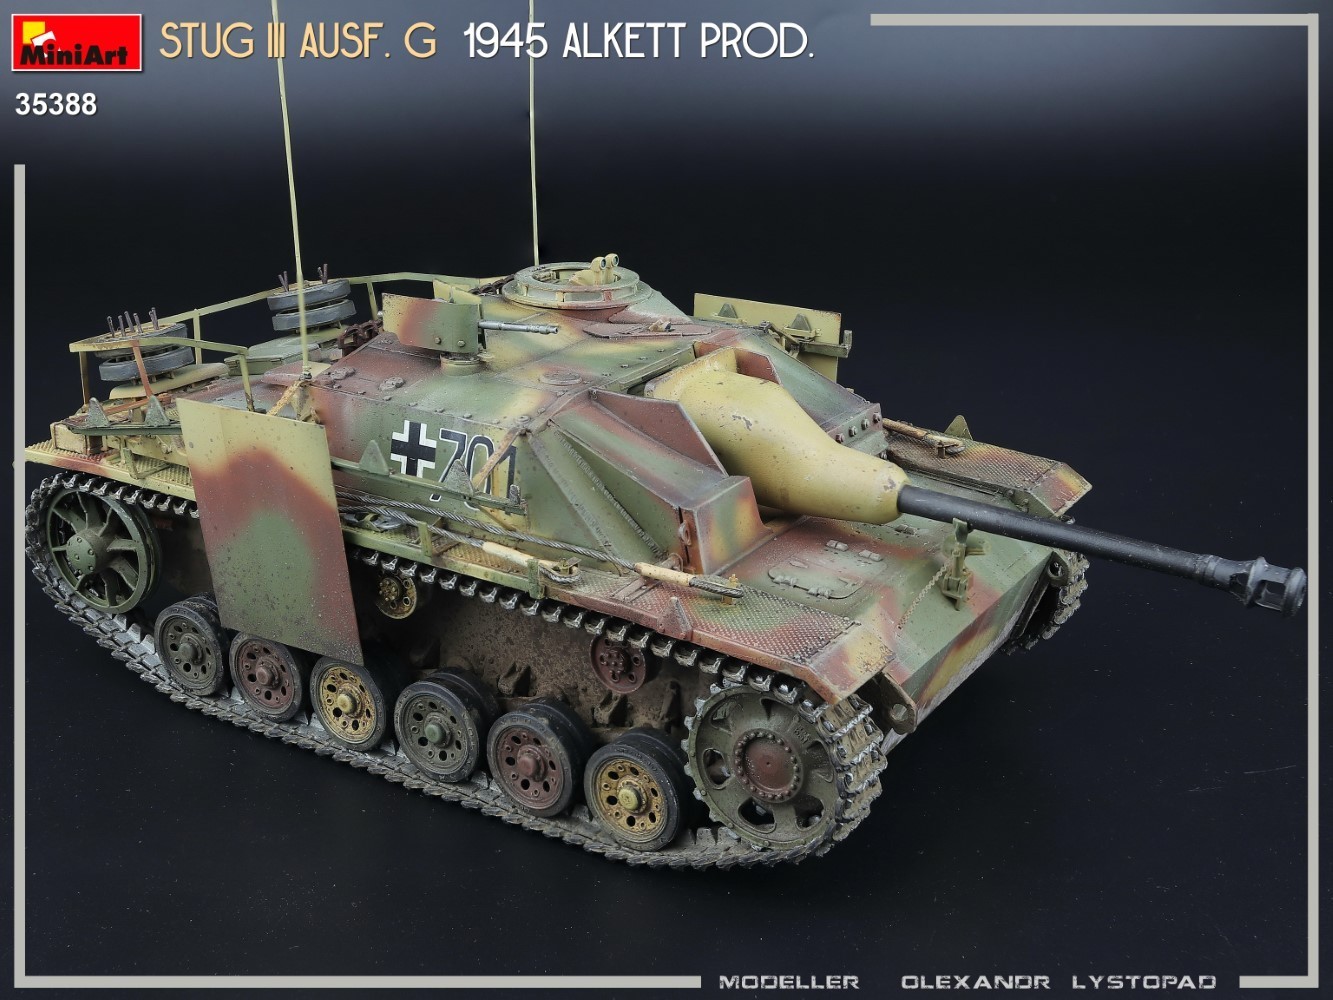 MiniArt to Release Highly Detailed 1/35 StuG III Ausf. G 1945 Alkett Prod. Model Kit Painting and Marking-14